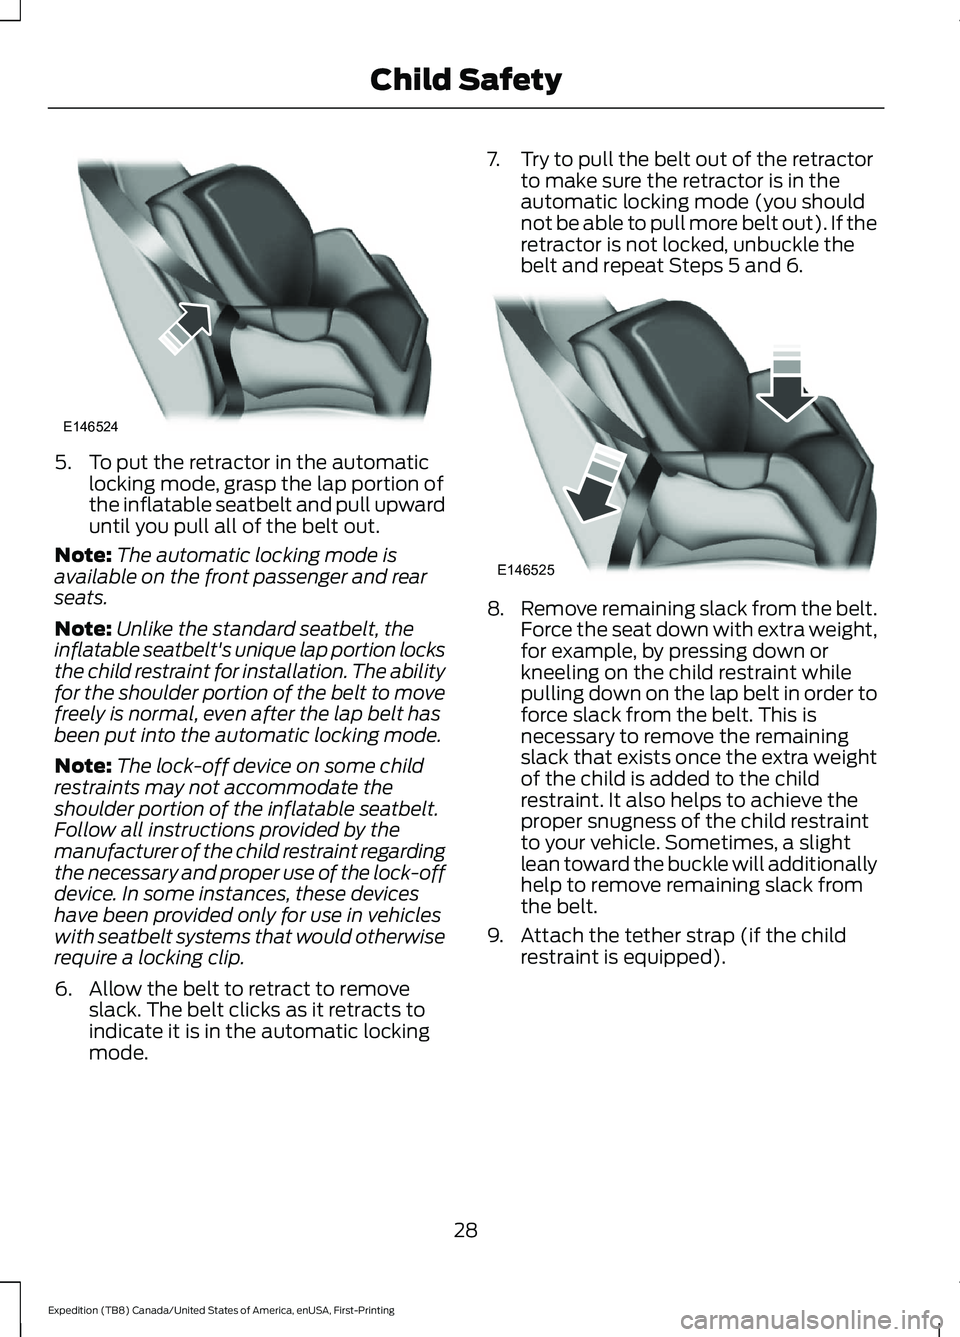 FORD EXPEDITION 2021  Owners Manual 5. To put the retractor in the automatic
locking mode, grasp the lap portion of
the inflatable seatbelt and pull upward
until you pull all of the belt out.
Note: The automatic locking mode is
availabl